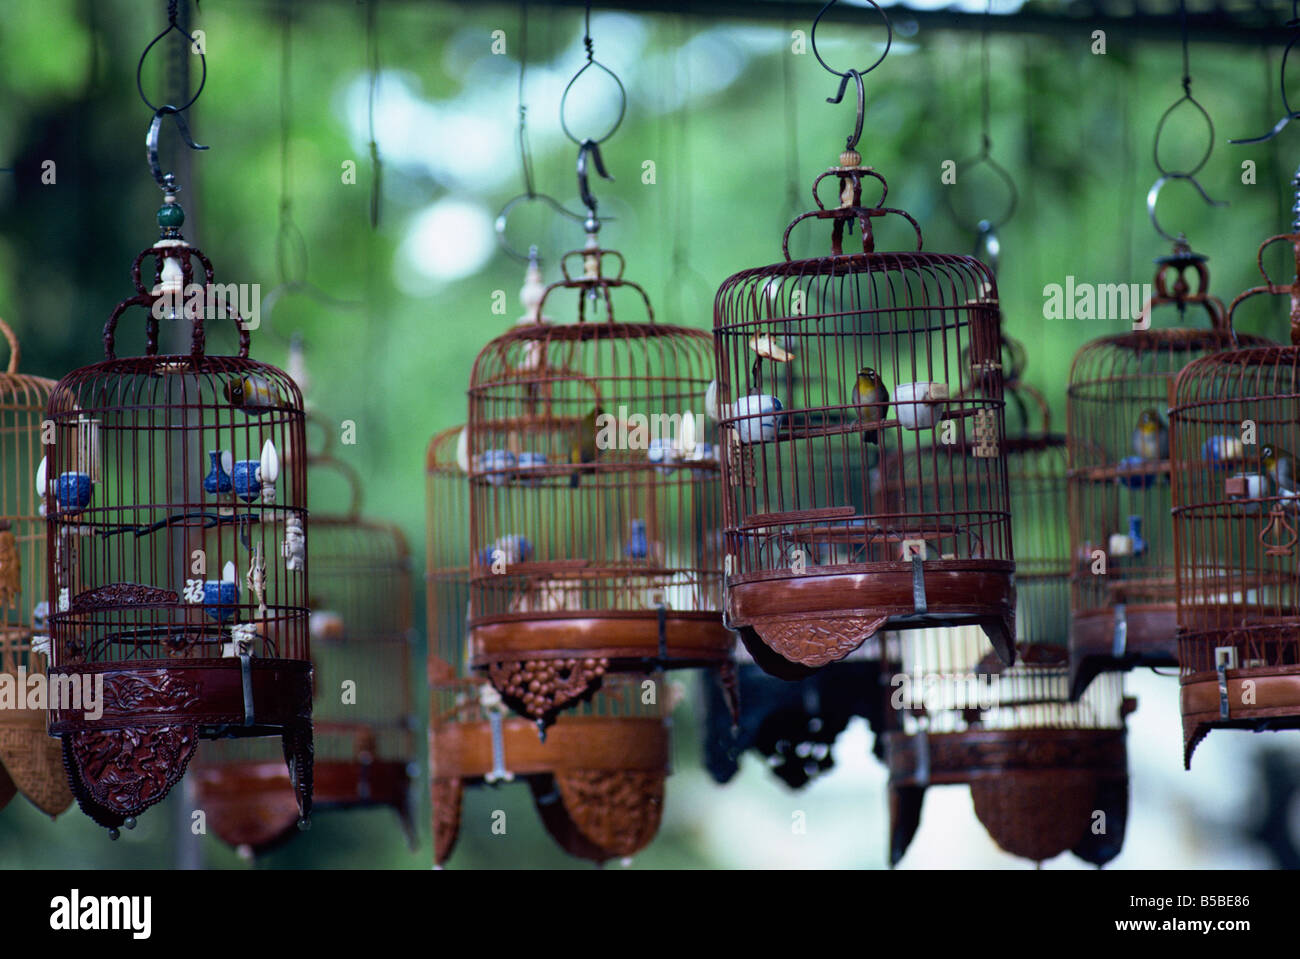 Caged birds for sale, Chinatown, Singapore, Southeast Asia Stock Photo